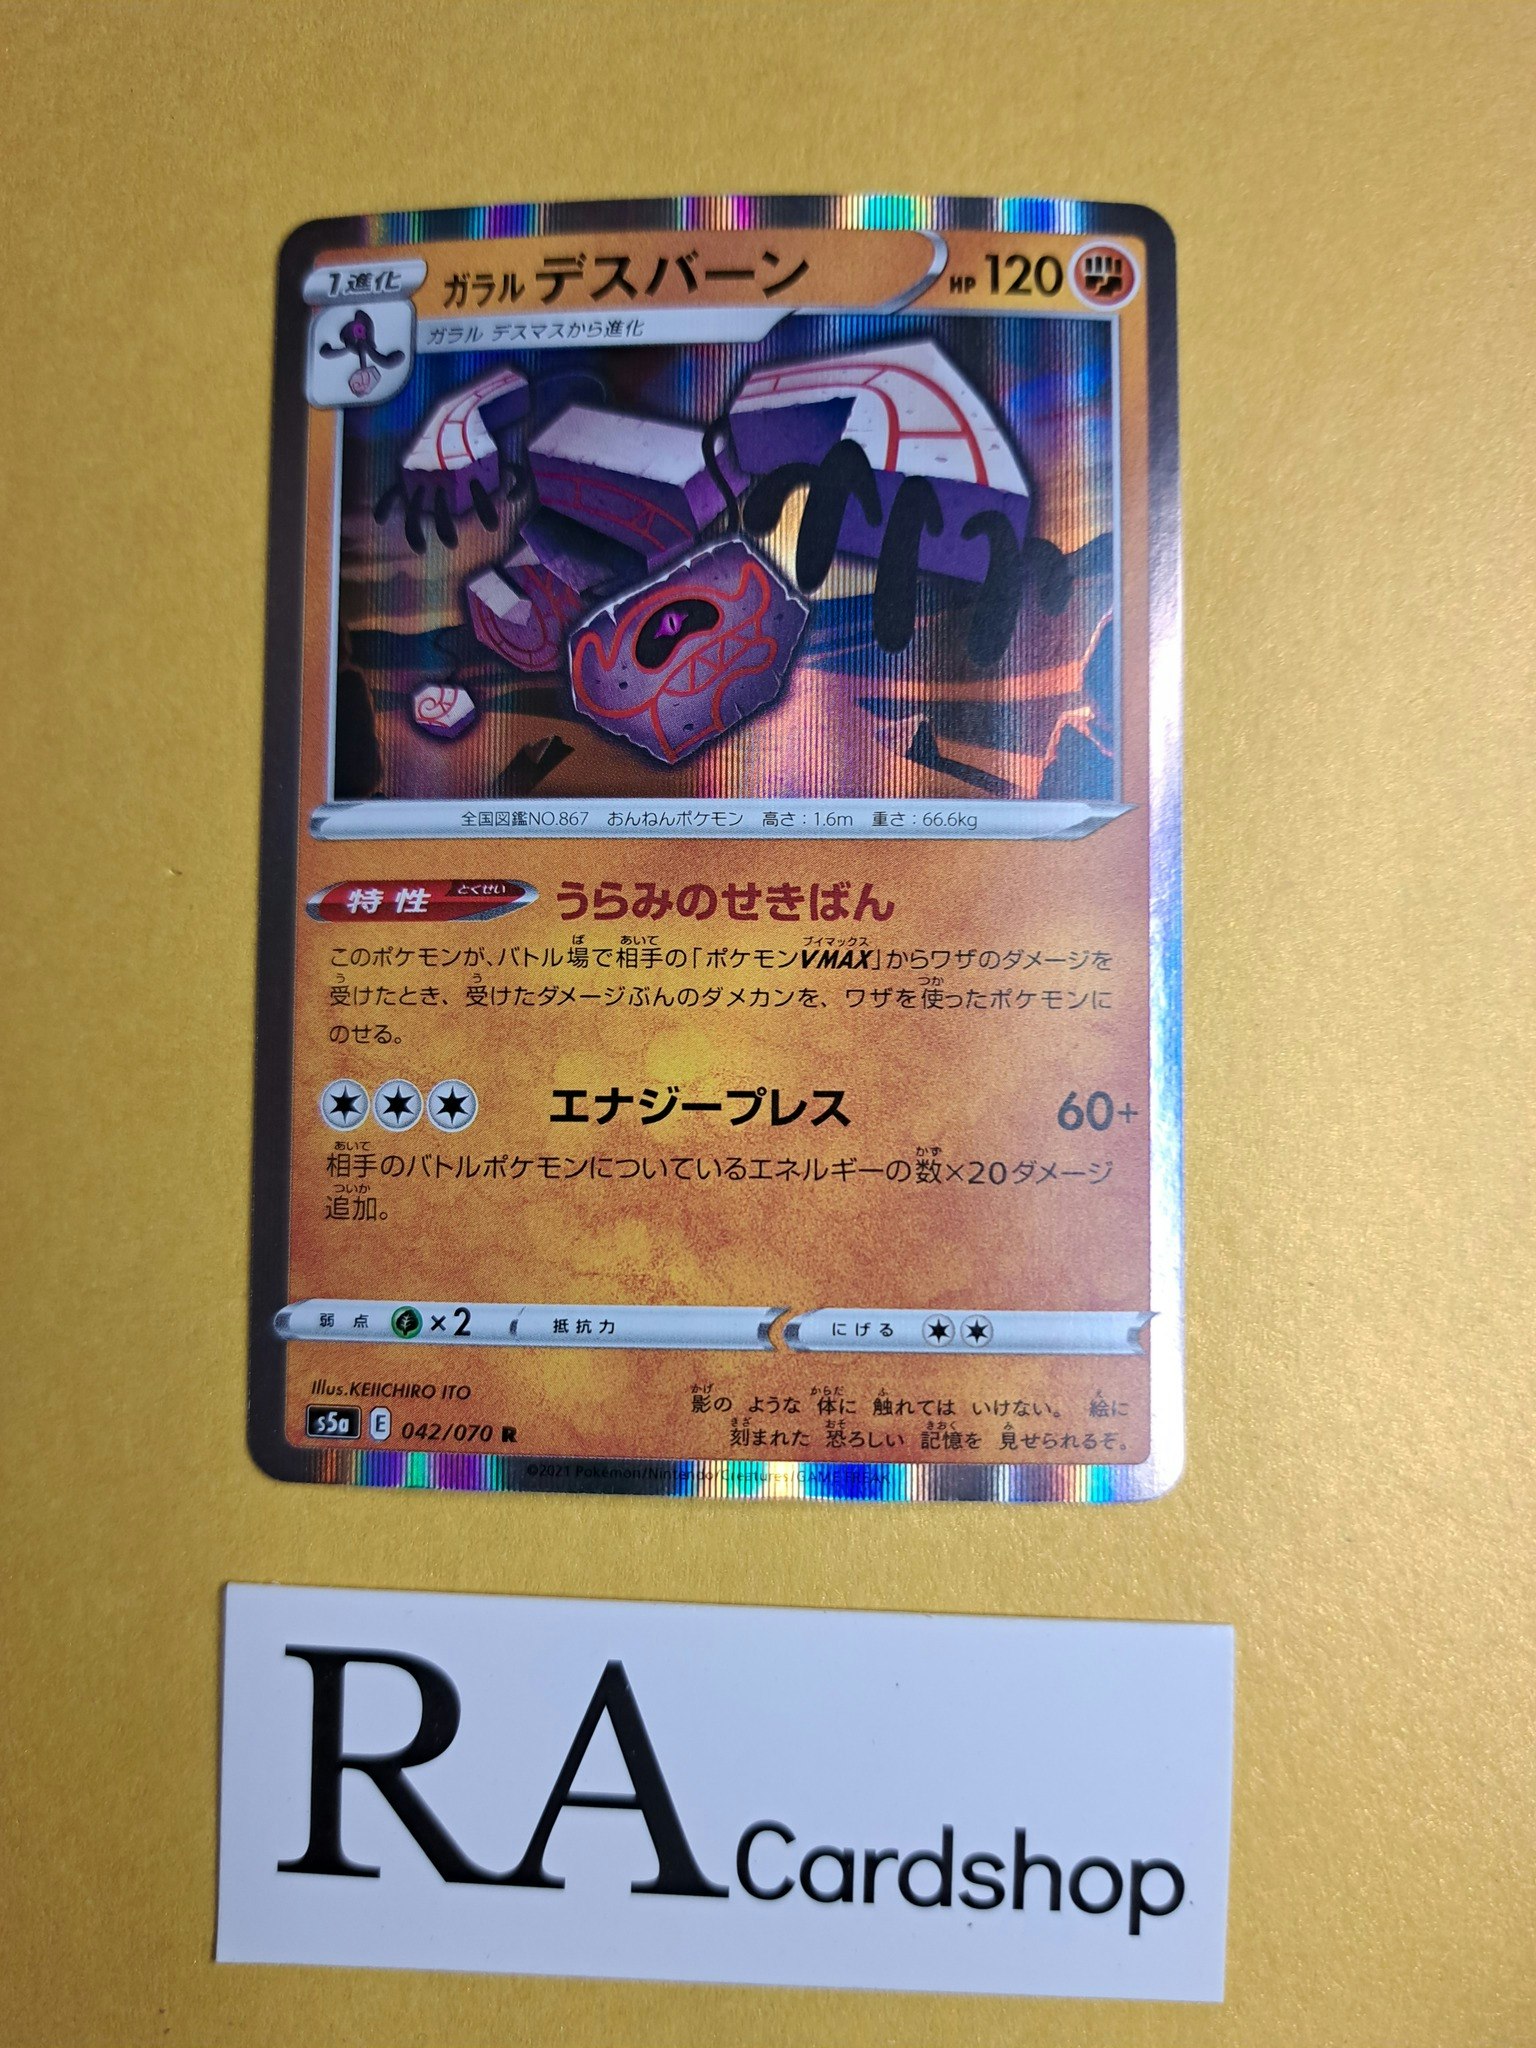 Galarian Runerigus Holo Rare 042/070 Matchless Fighters s5a Pokémon